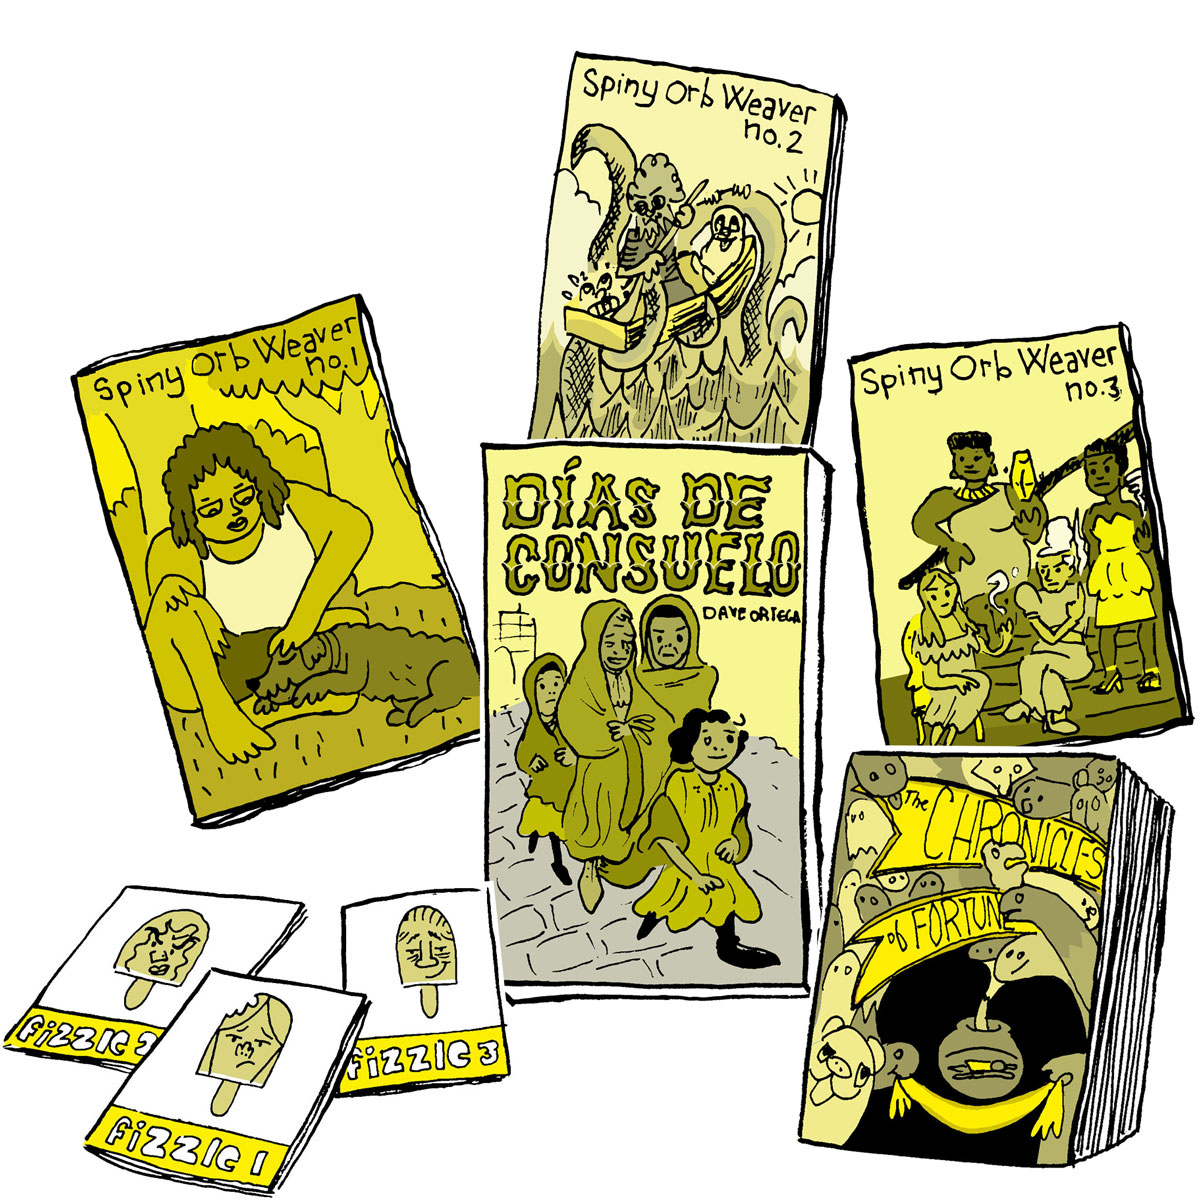 drawings of several comics and books published by Radiator Comics